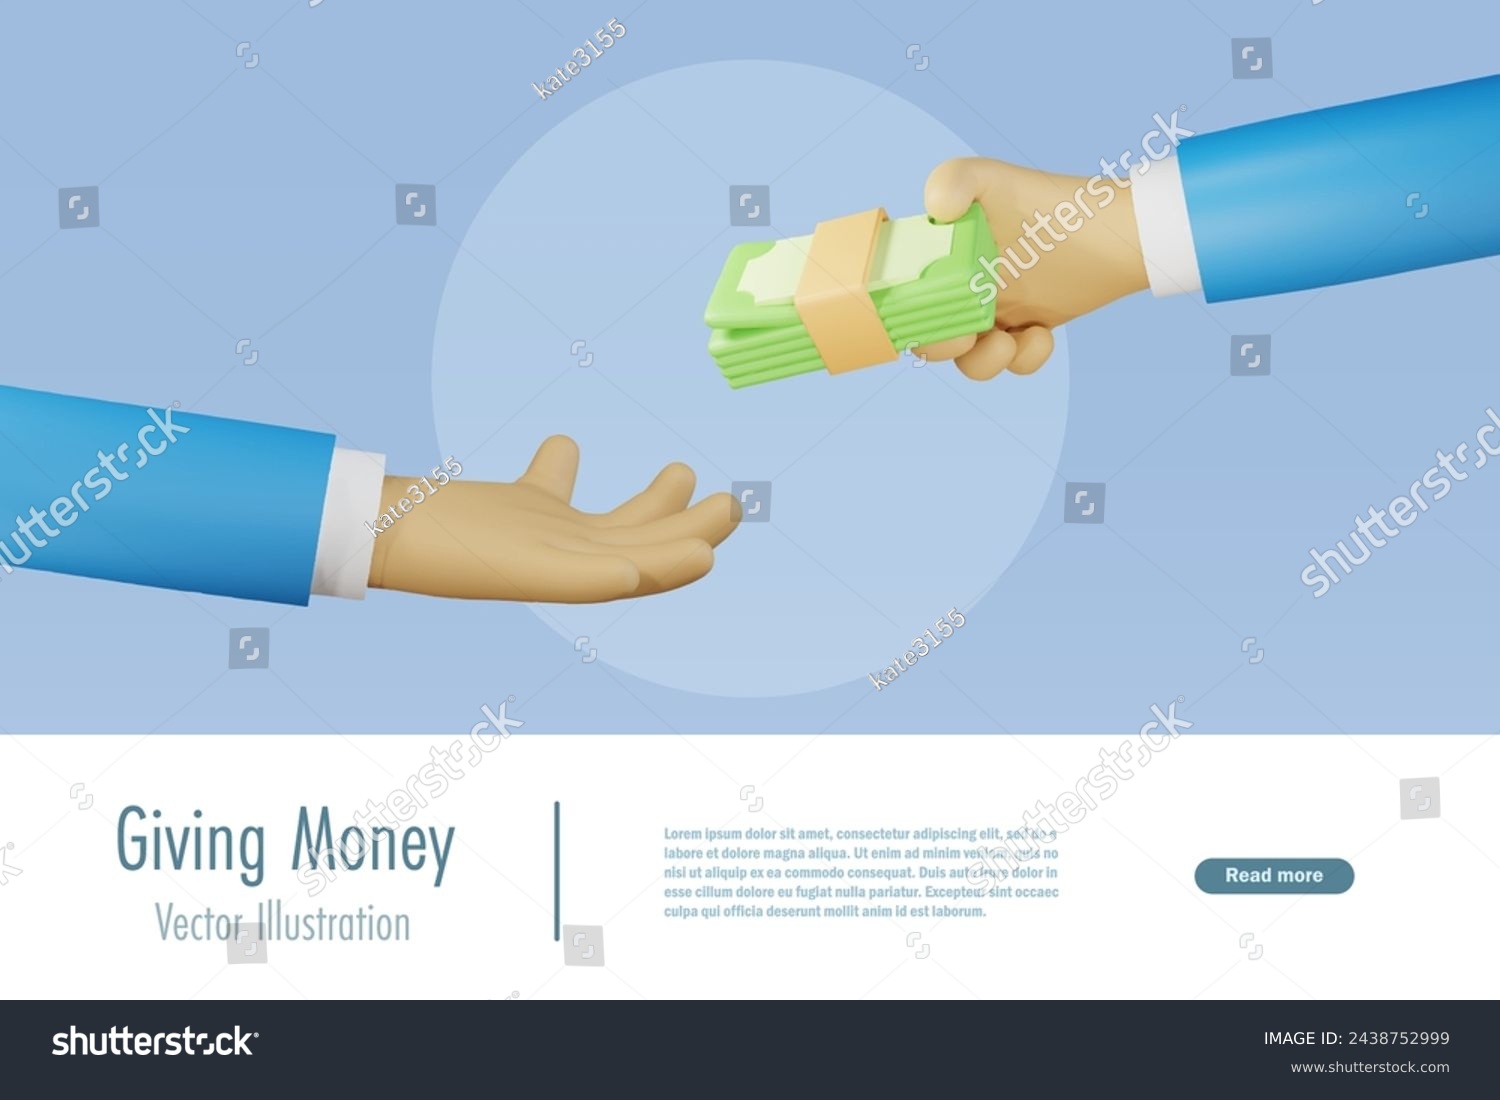 SVG of Hand giving money to businessman hand. Salary, wage, expense payment and corruption concept. 3D vector created from graphic software. svg